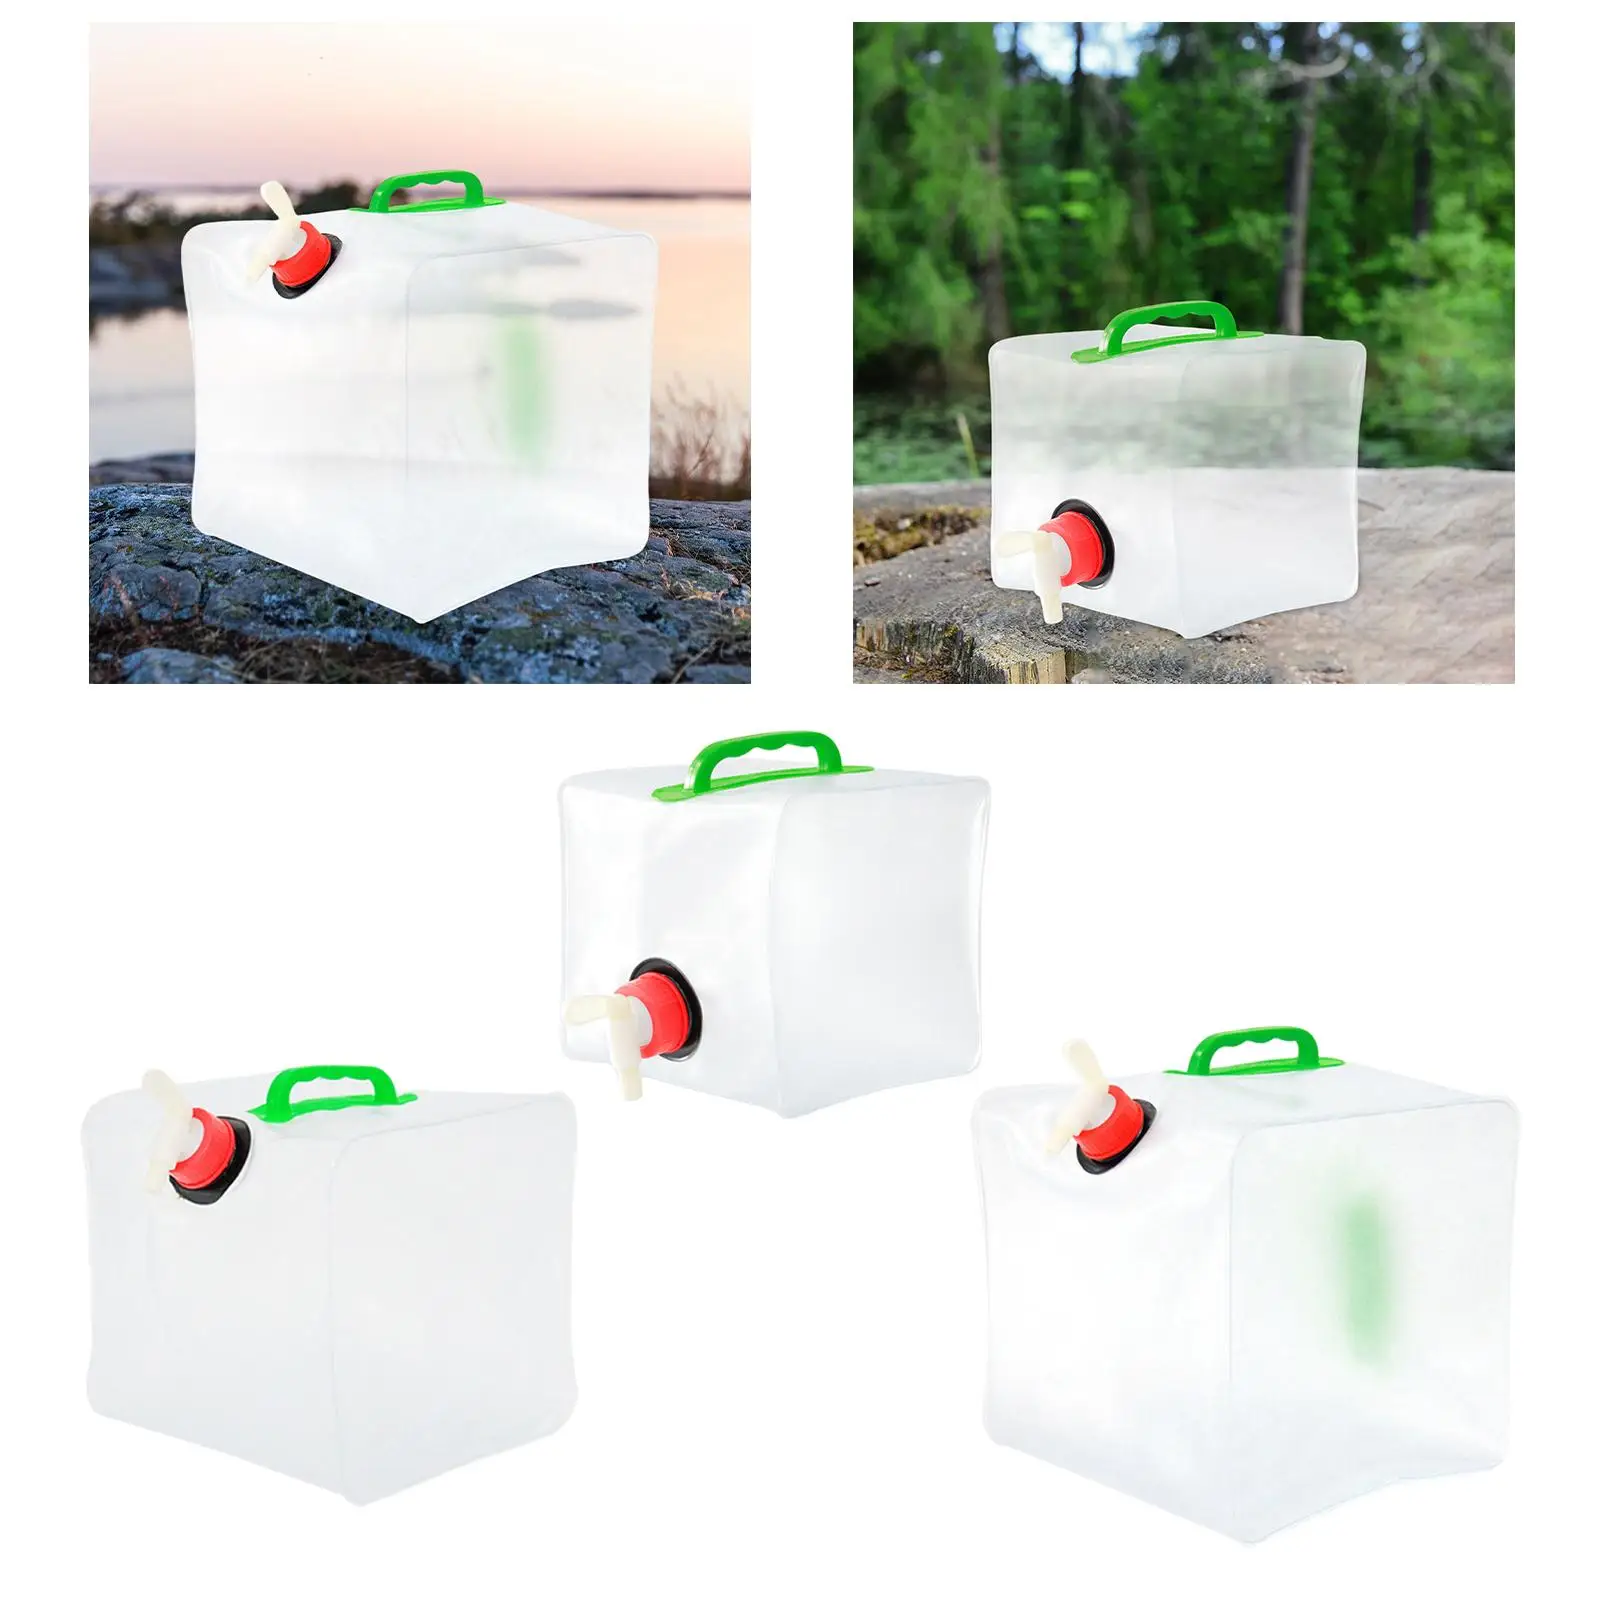 Collapsible Water Container Bag Drink Dispenser Equipment with Lid and Handle Water Bottle Carrier Water Storage Jug for Hiking